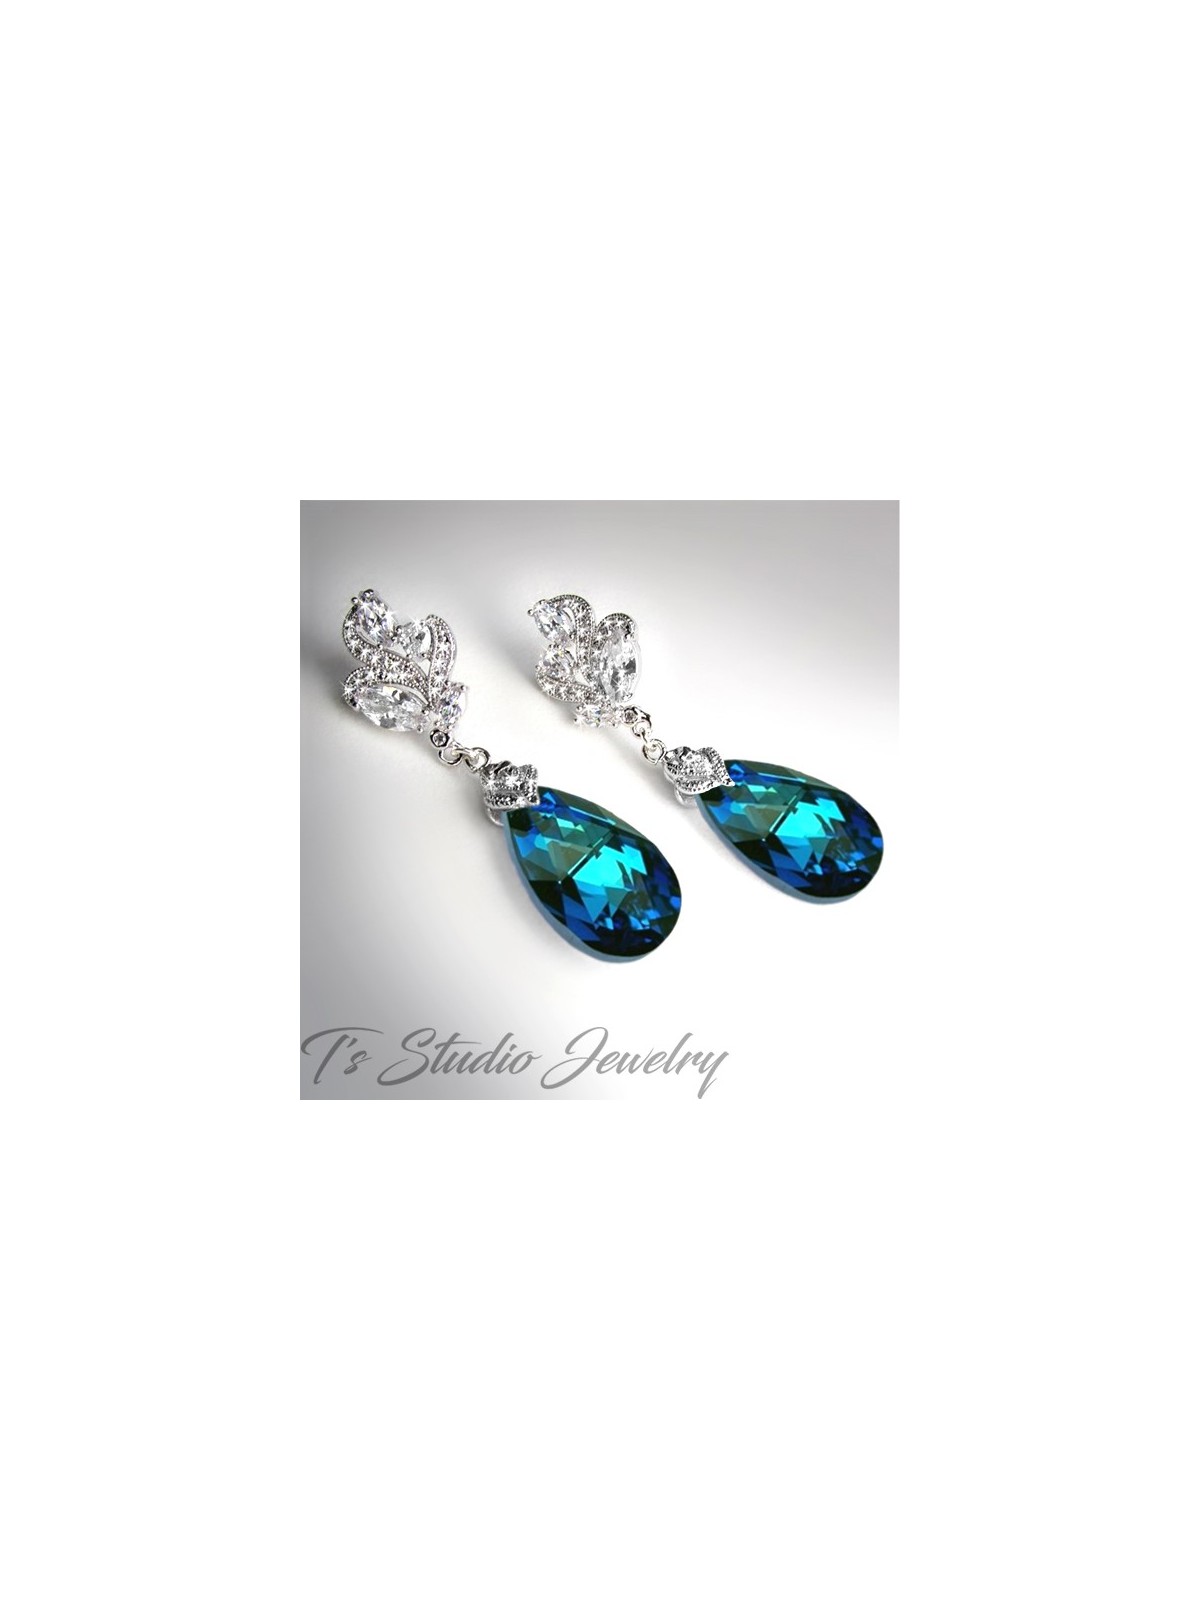 Sapphire Blue Crystal Necklace Earrings Set